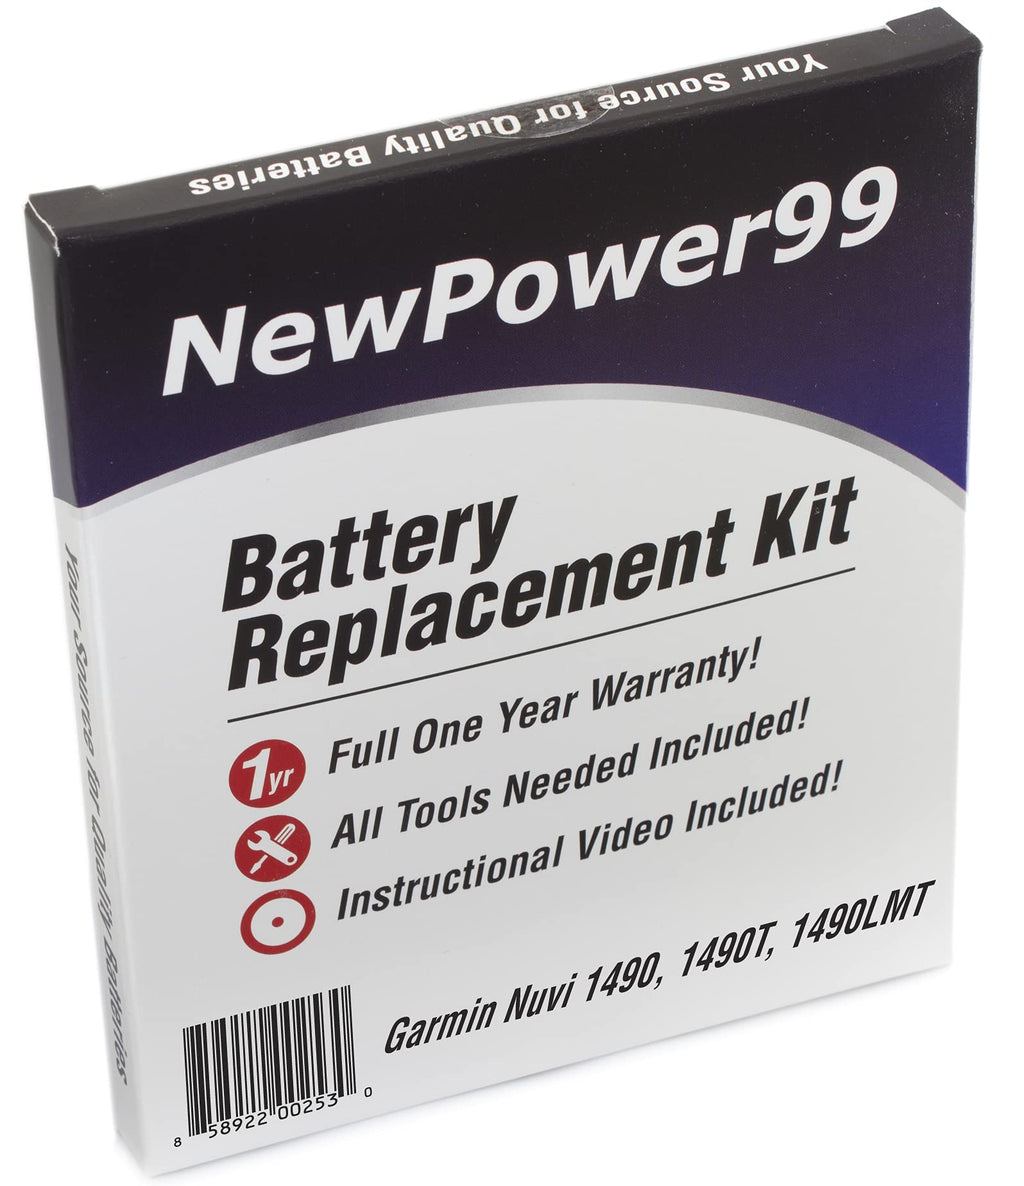 NewPower99 Battery Replacement Kit with Battery, Video Instructions and Tools for Garmin Nuvi 1490